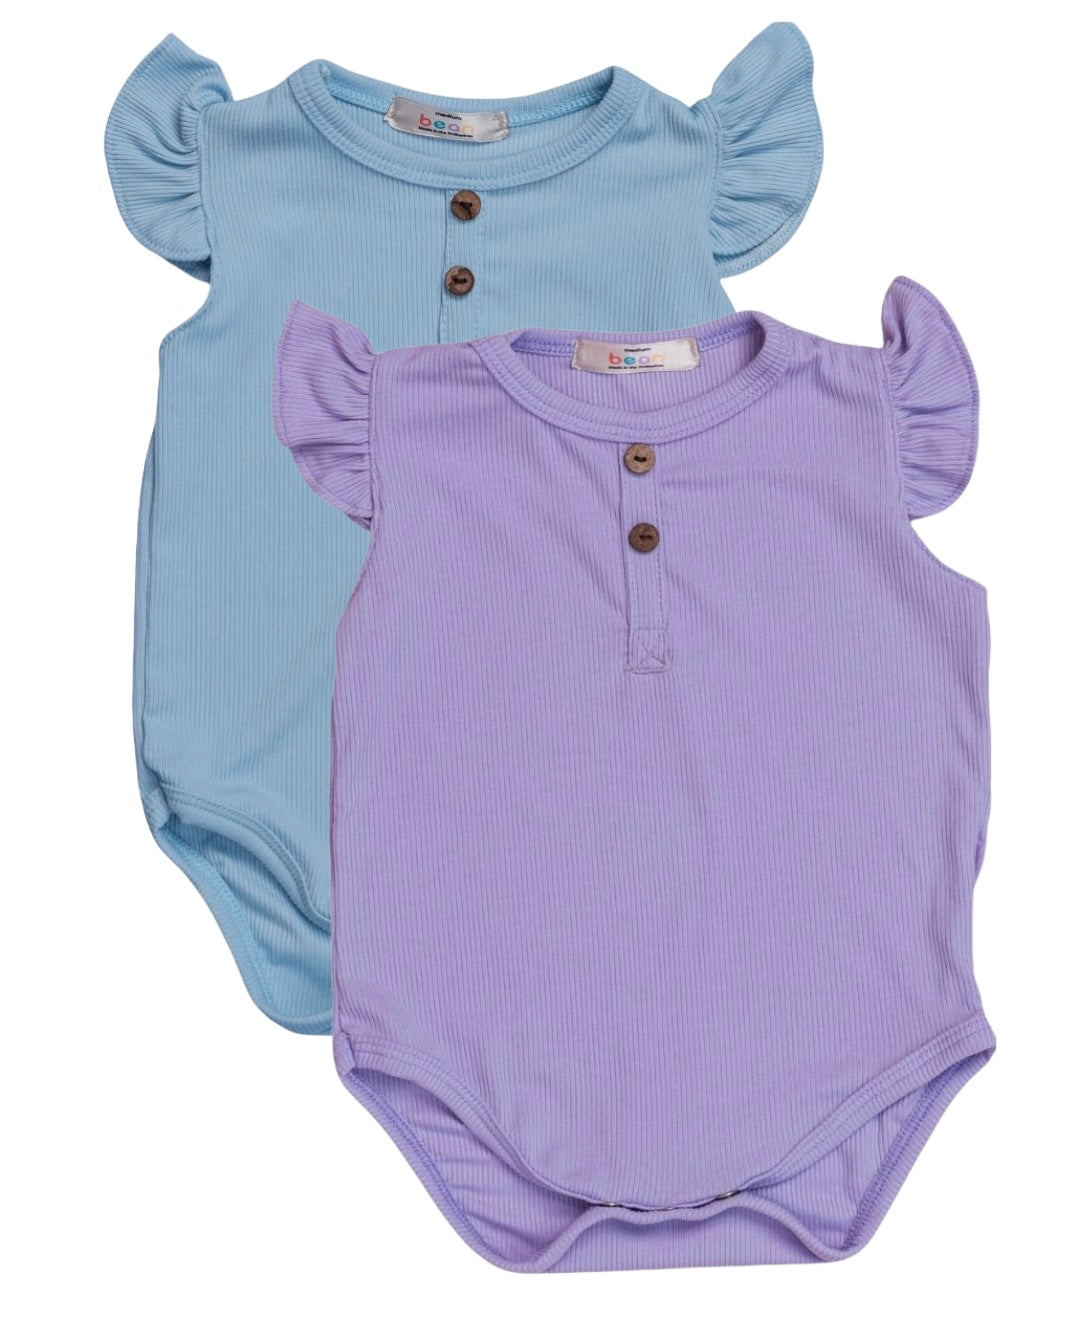 Comfy Casuals Play Ruffle Sleeve Onesies - Set of 2